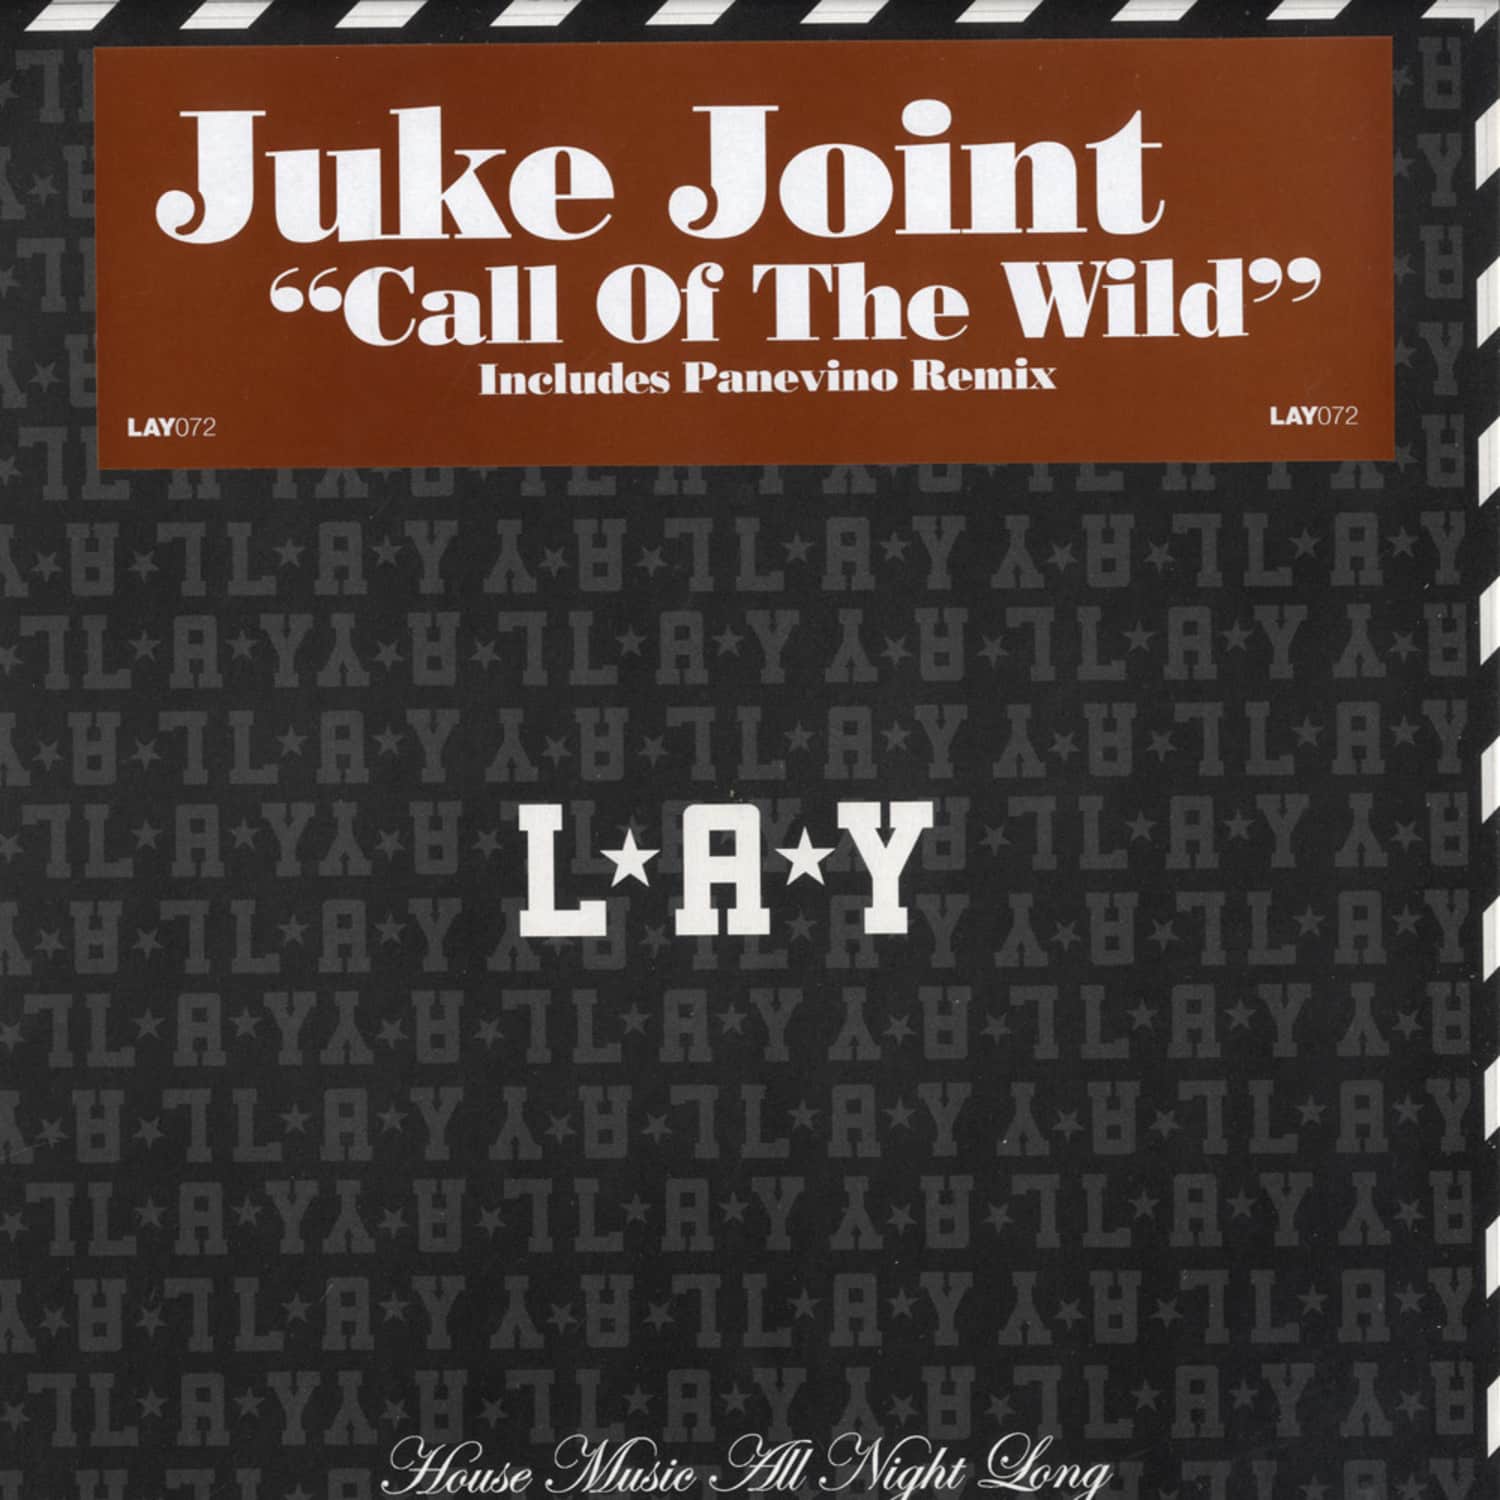 Juke Joint - CALL OF THE WILD